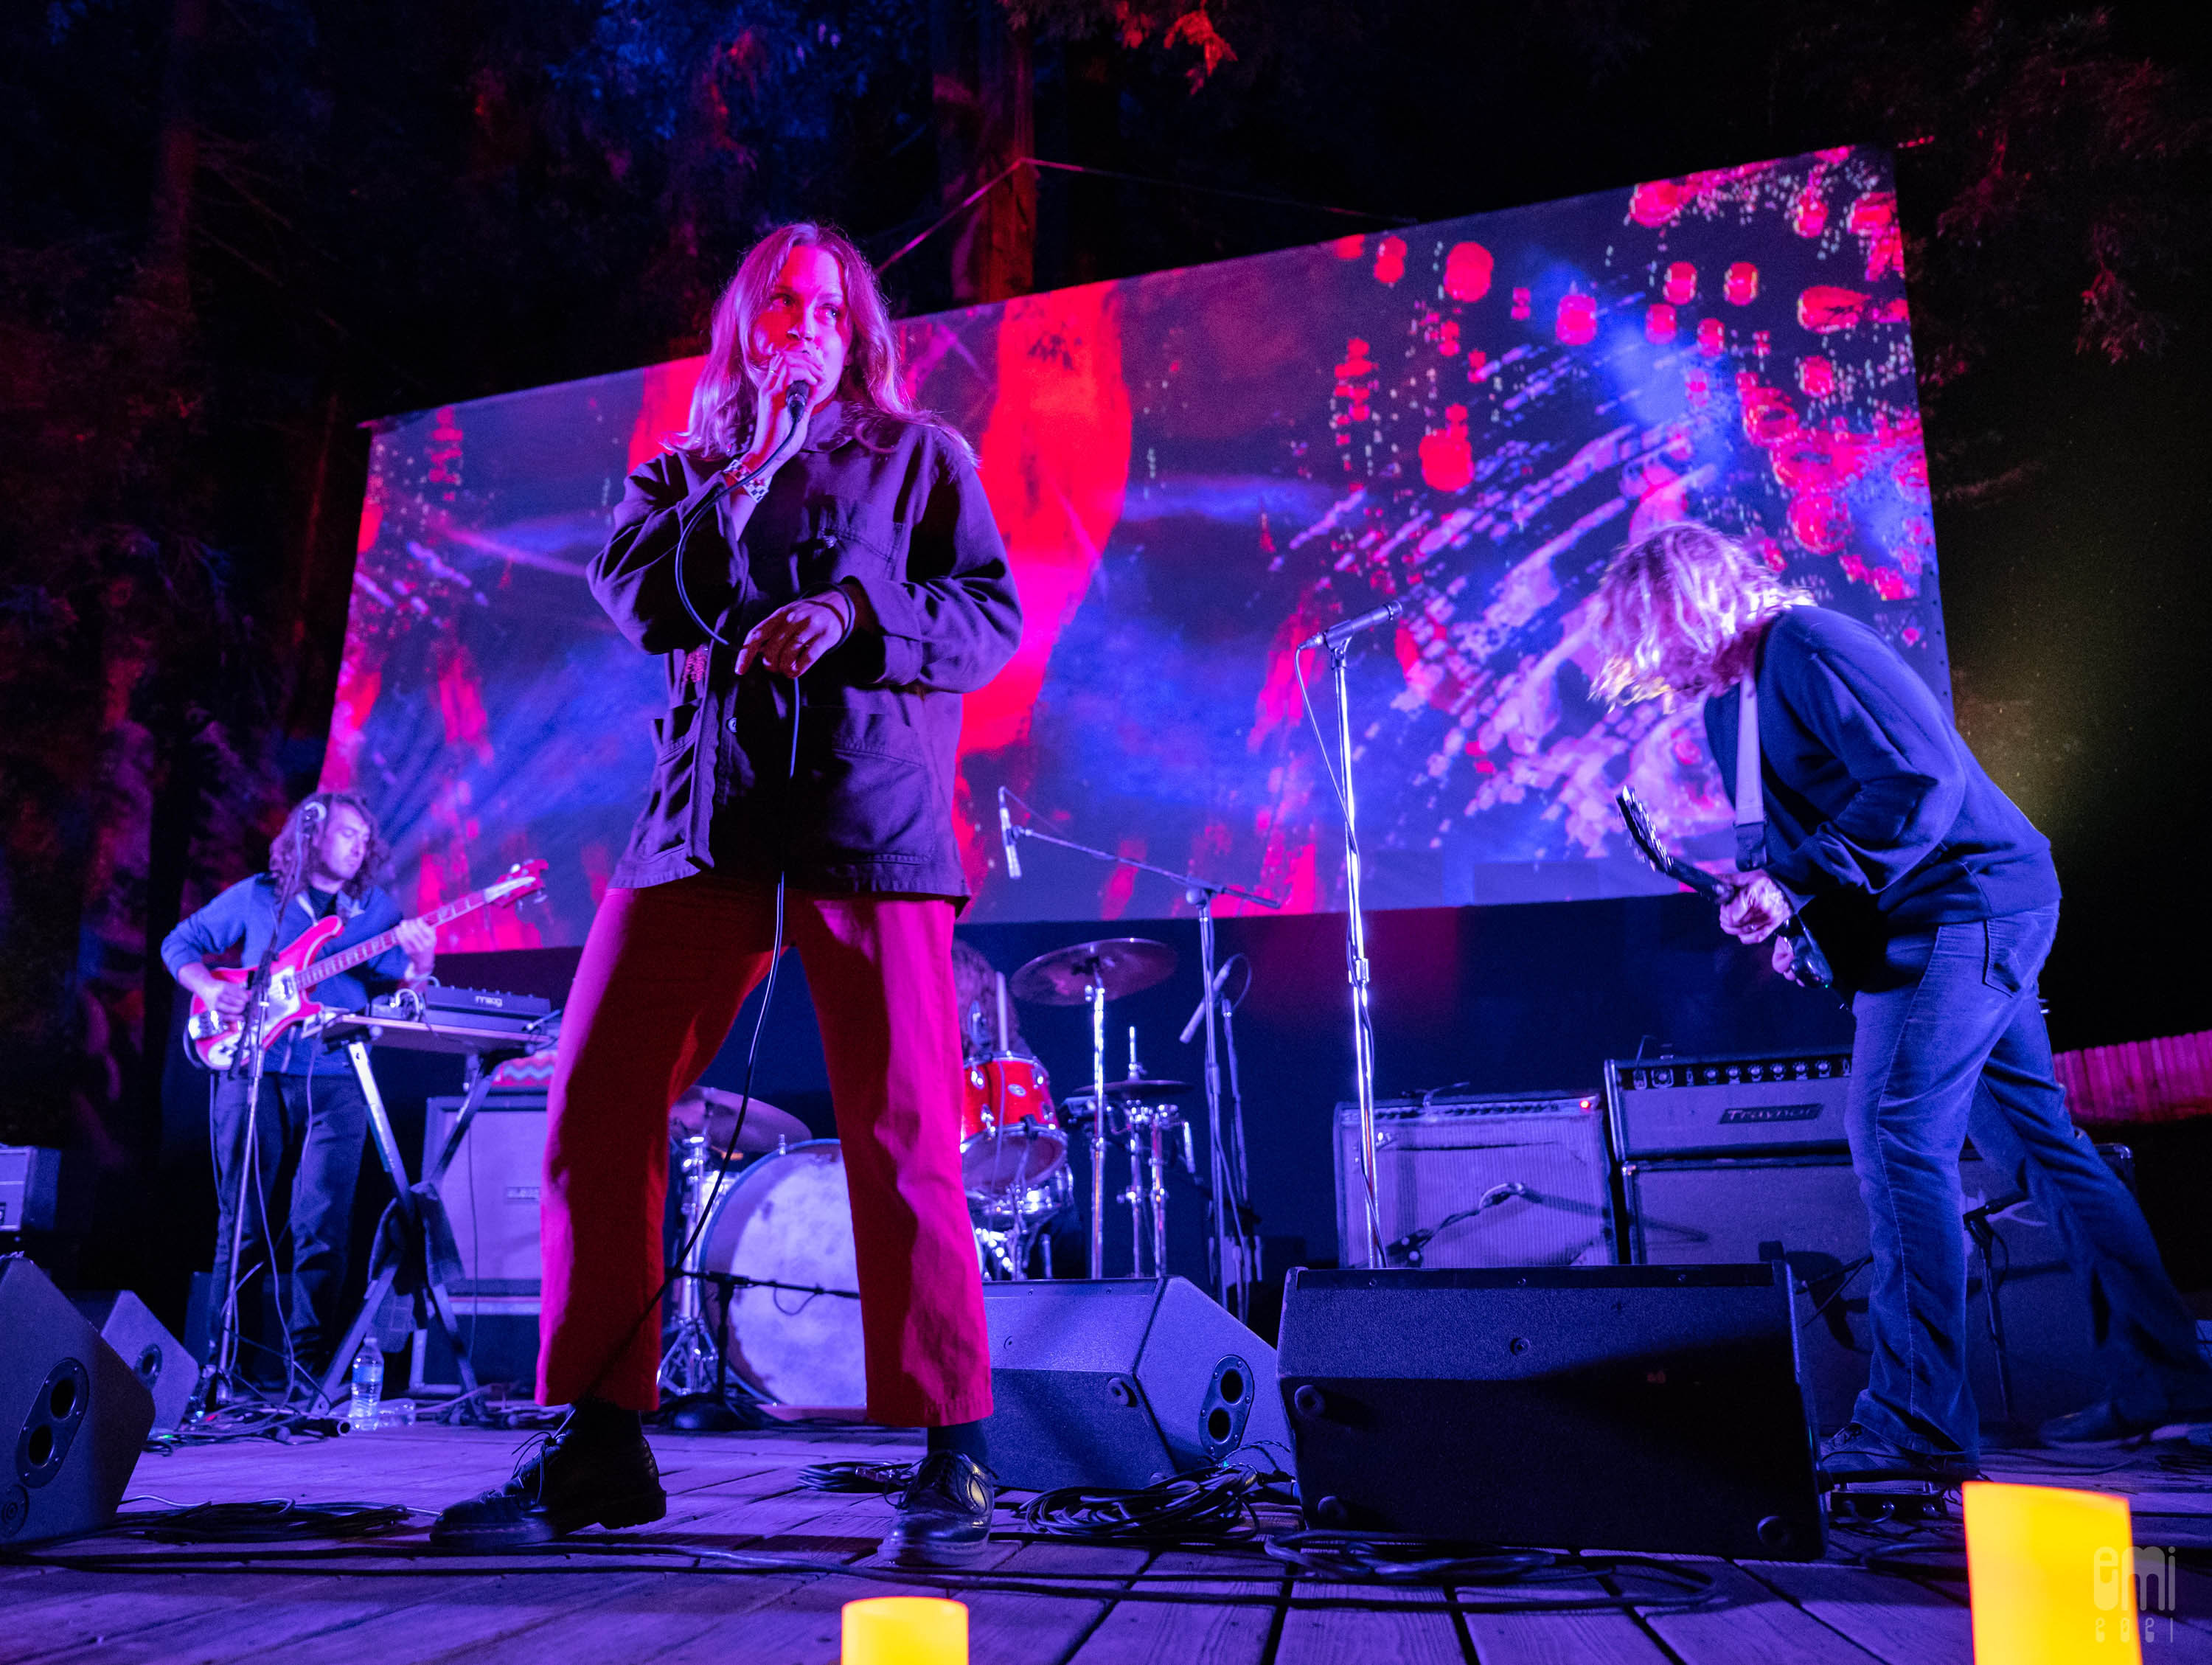 Photography – 20220201 (((folkYEAH!))) Presents Ty Segall & Freedom Band with Oog Bogo at Moe’s Alley, Santa Cruz